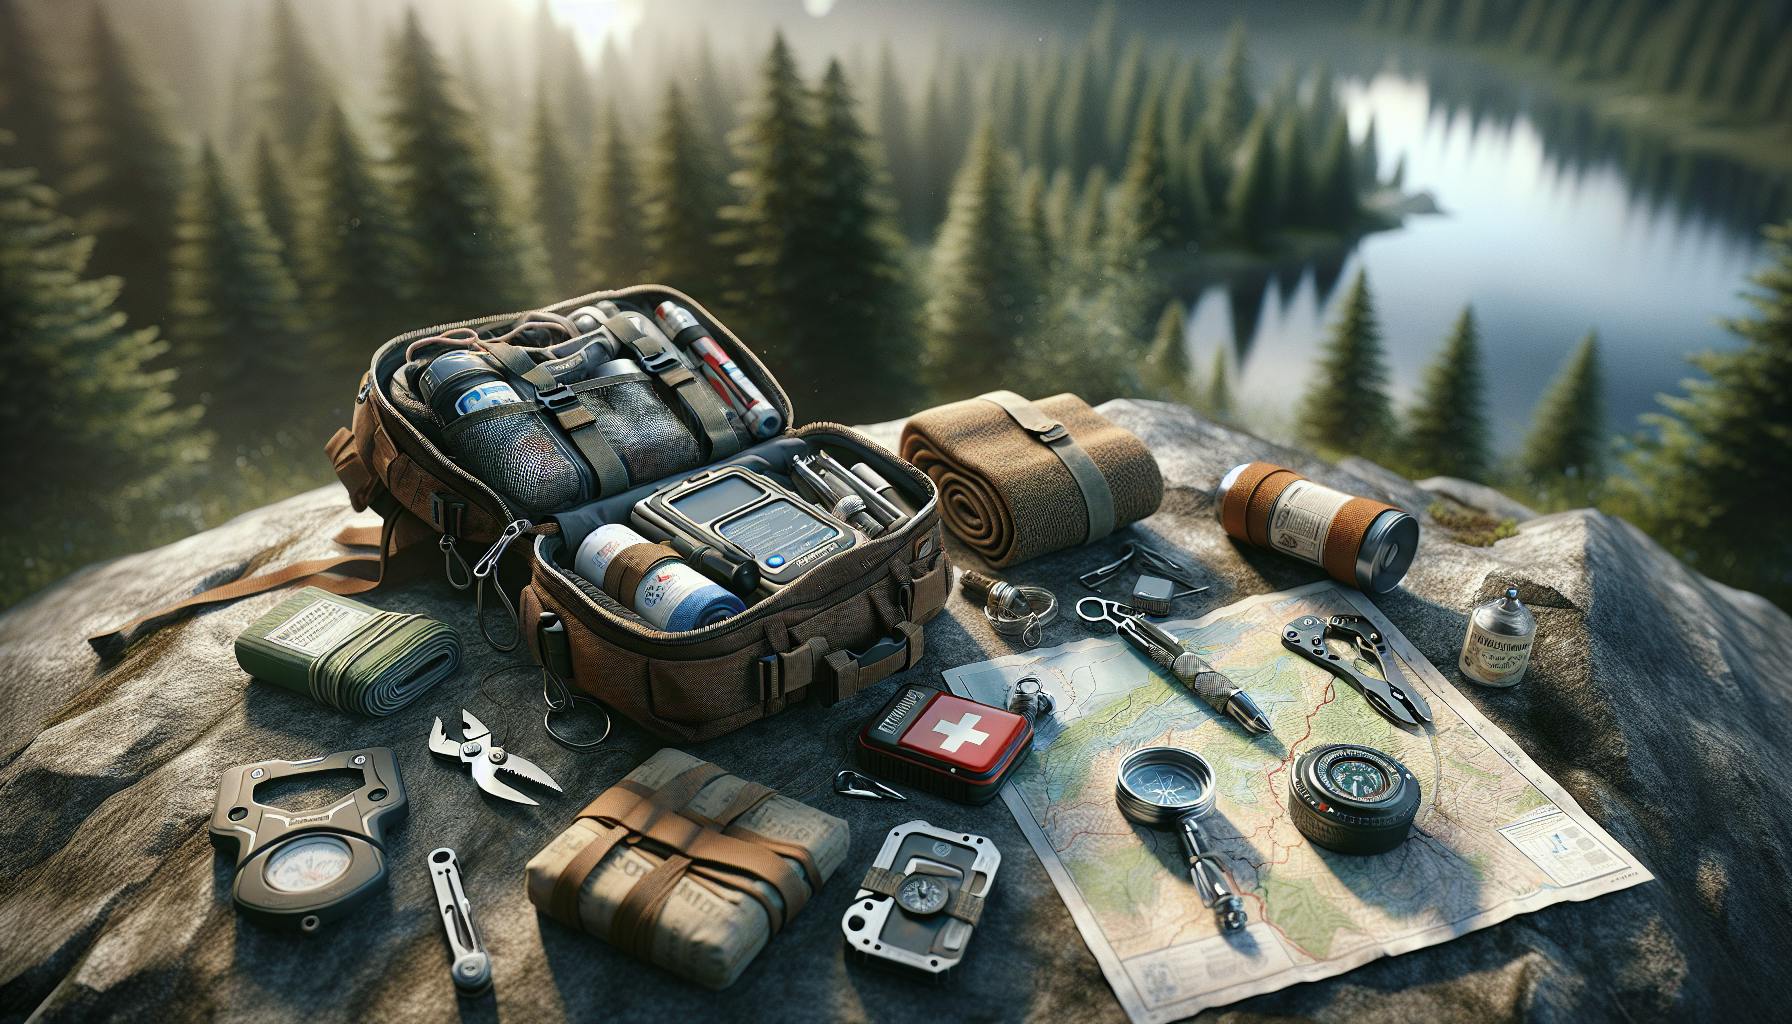 Building a Small Survival Kit